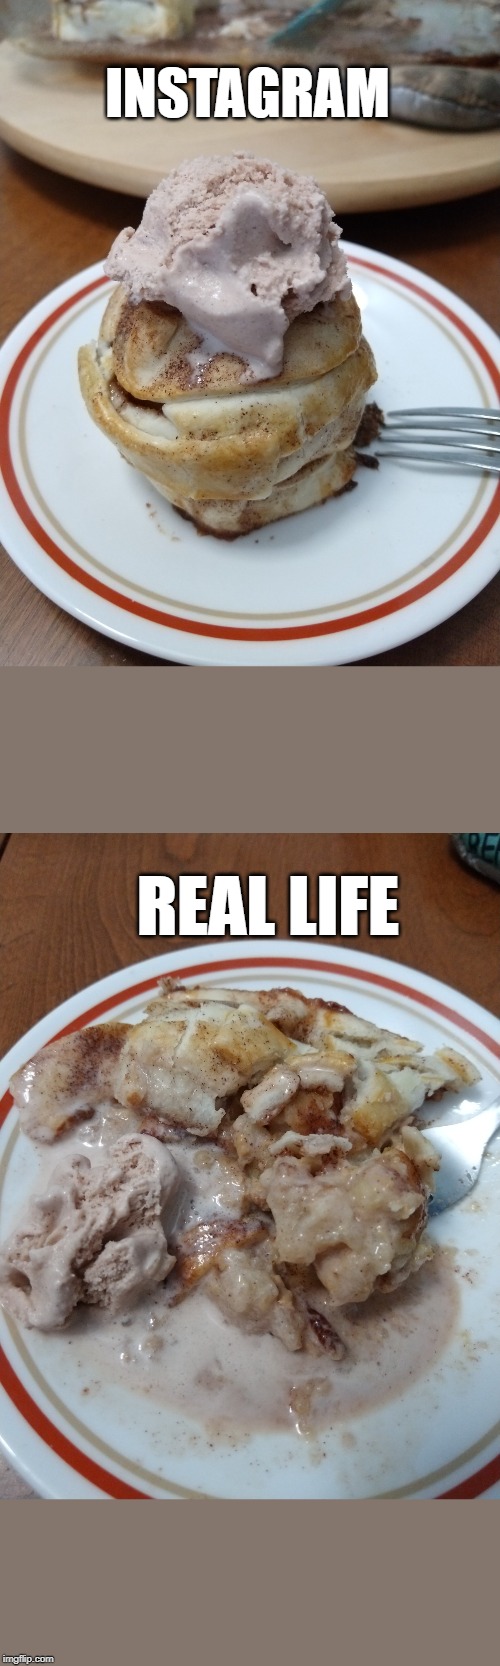 INSTAGRAM; REAL LIFE | image tagged in instagram | made w/ Imgflip meme maker